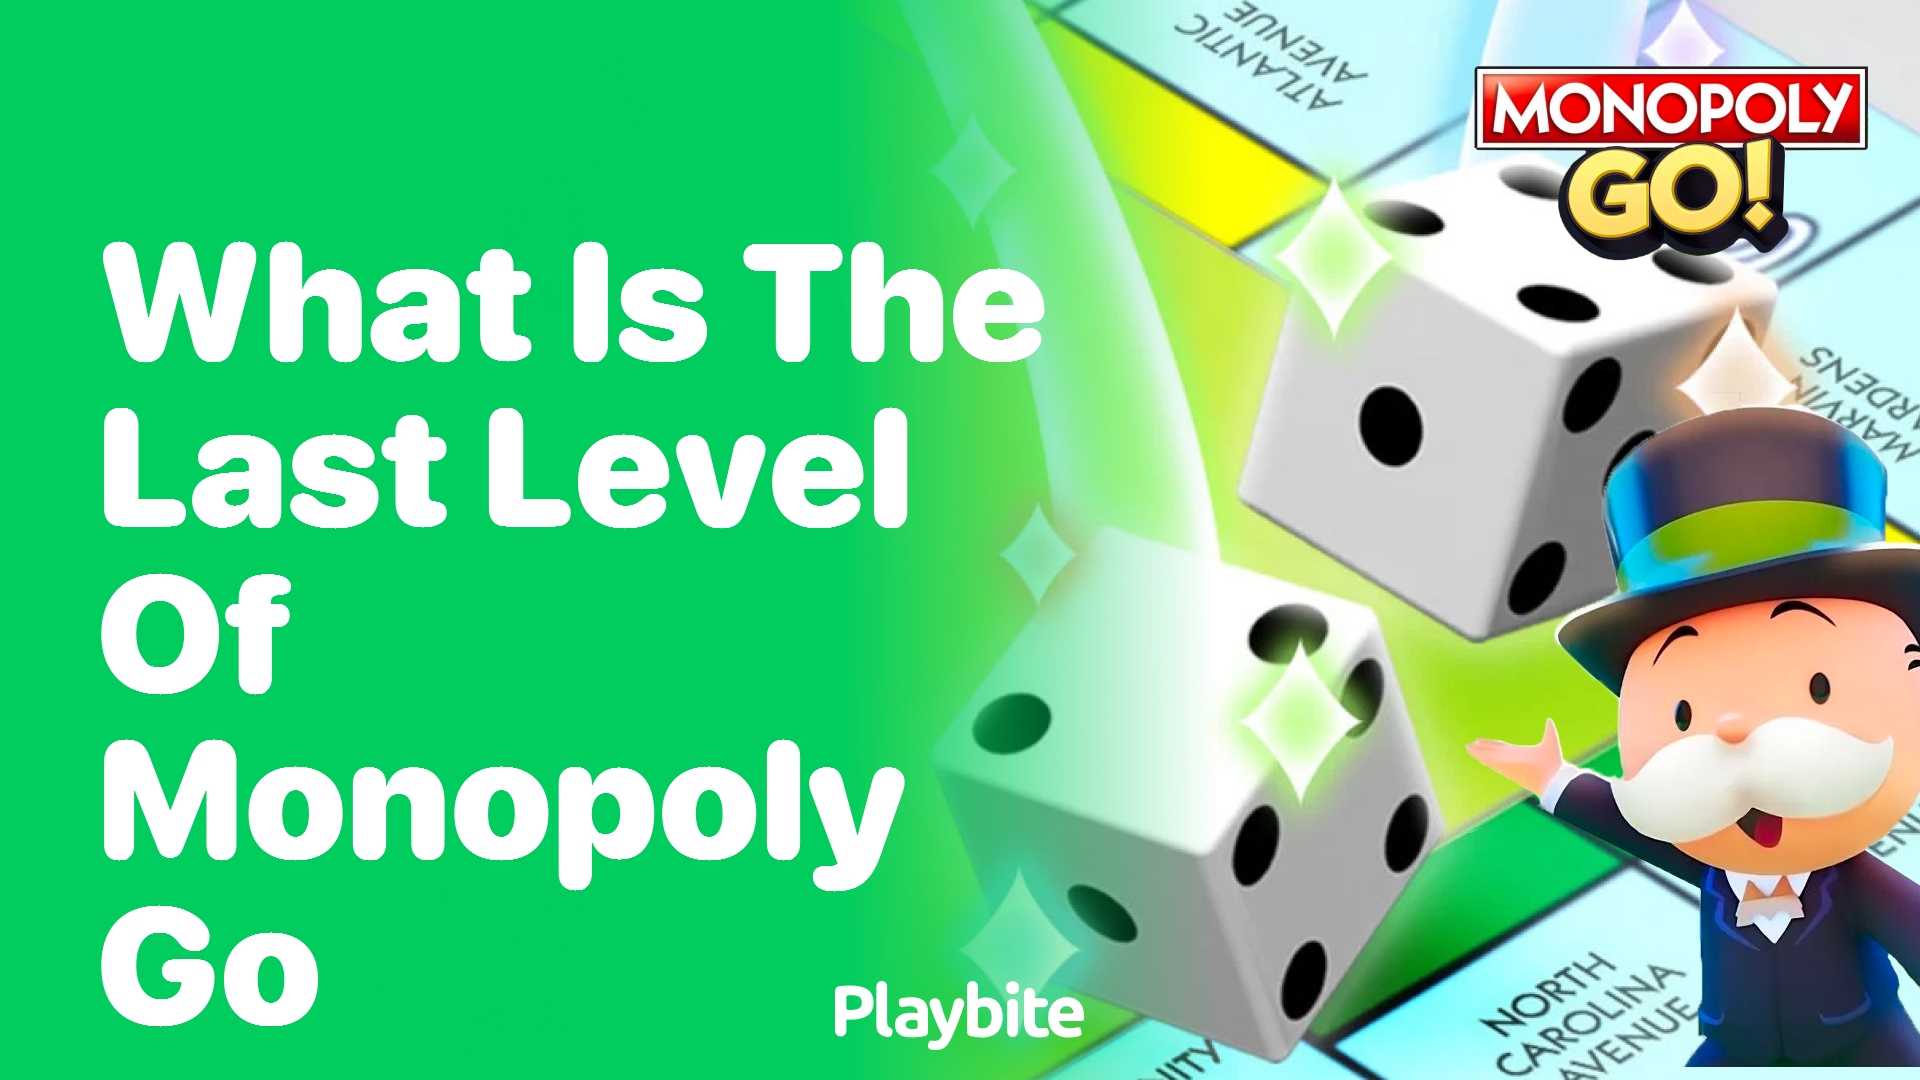 What Is the Last Level of Monopoly Go?